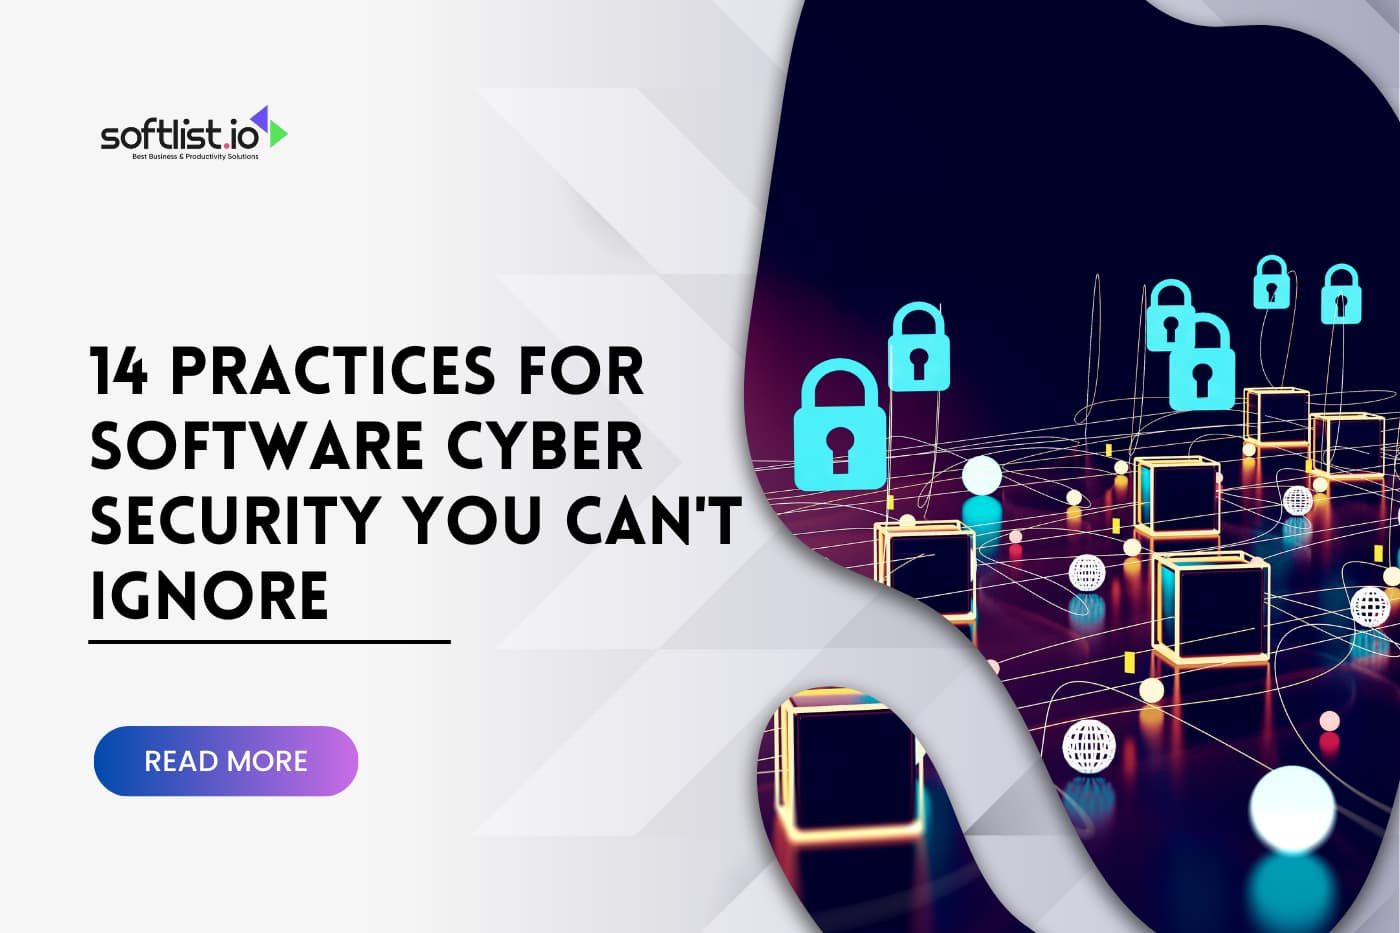 14 Practices for Software Cyber Security You Can't Ignore